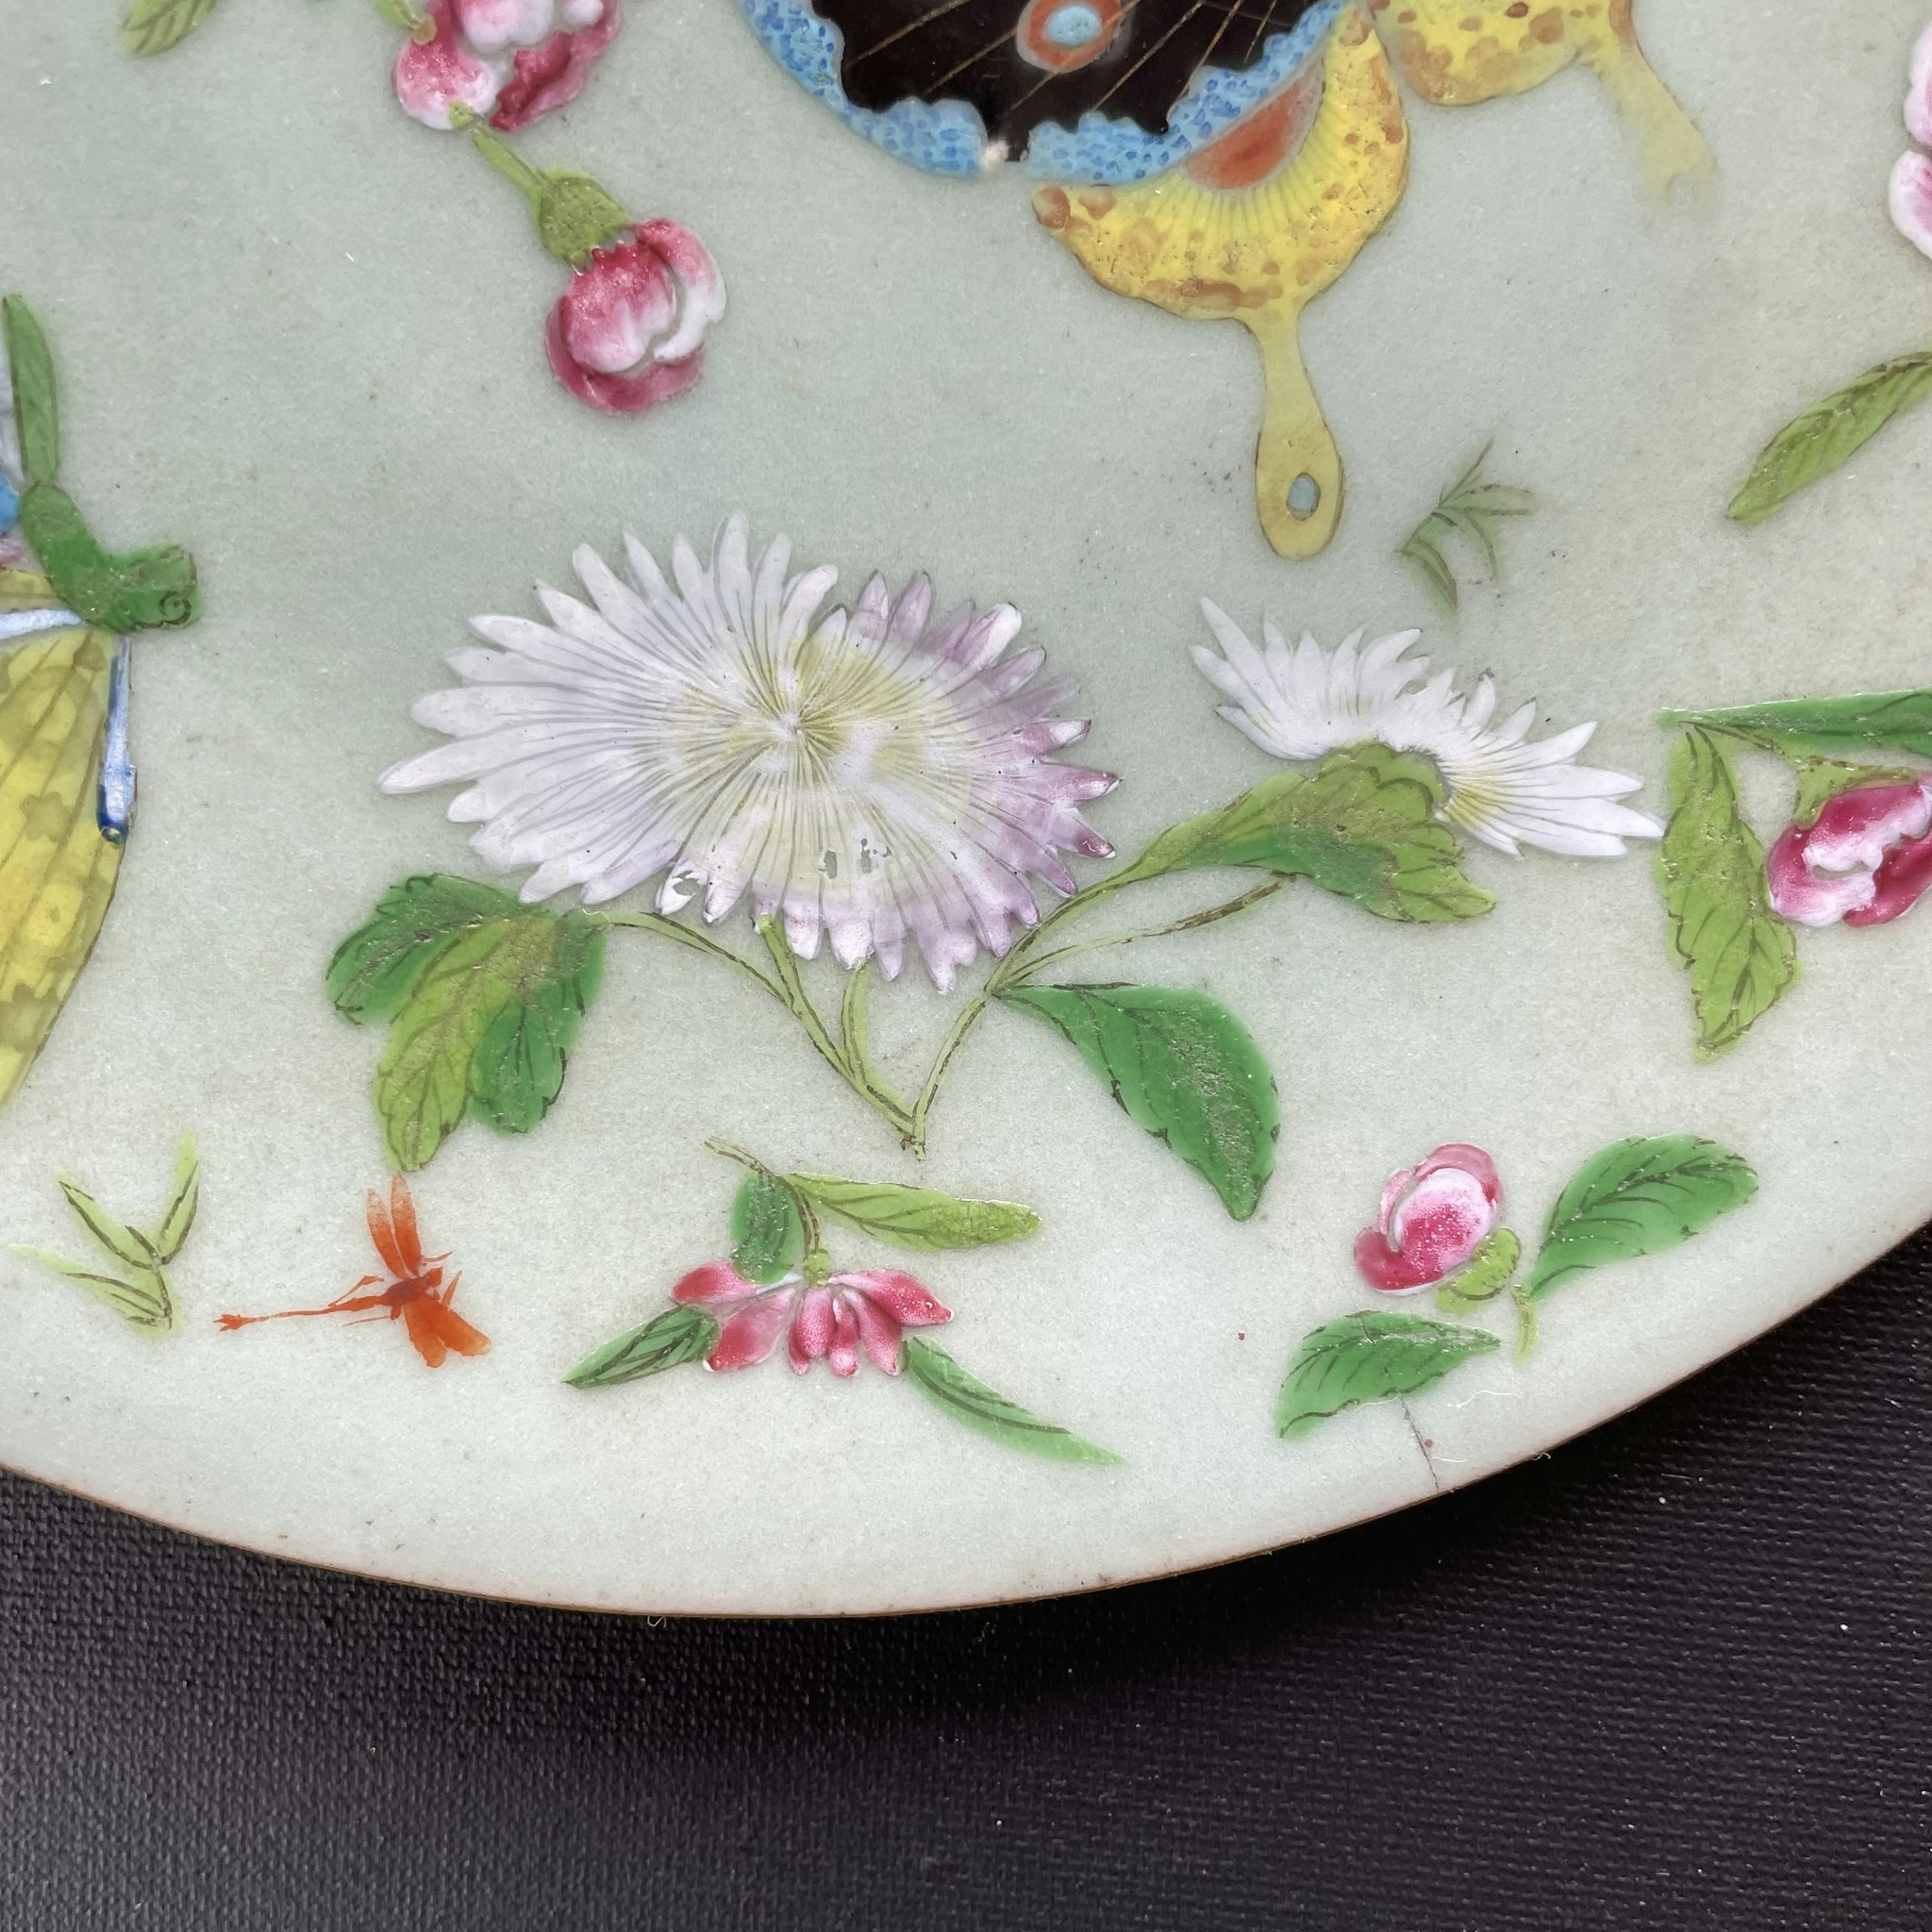 Chinese antique celadon canton butterfly plate, 19th c #1551